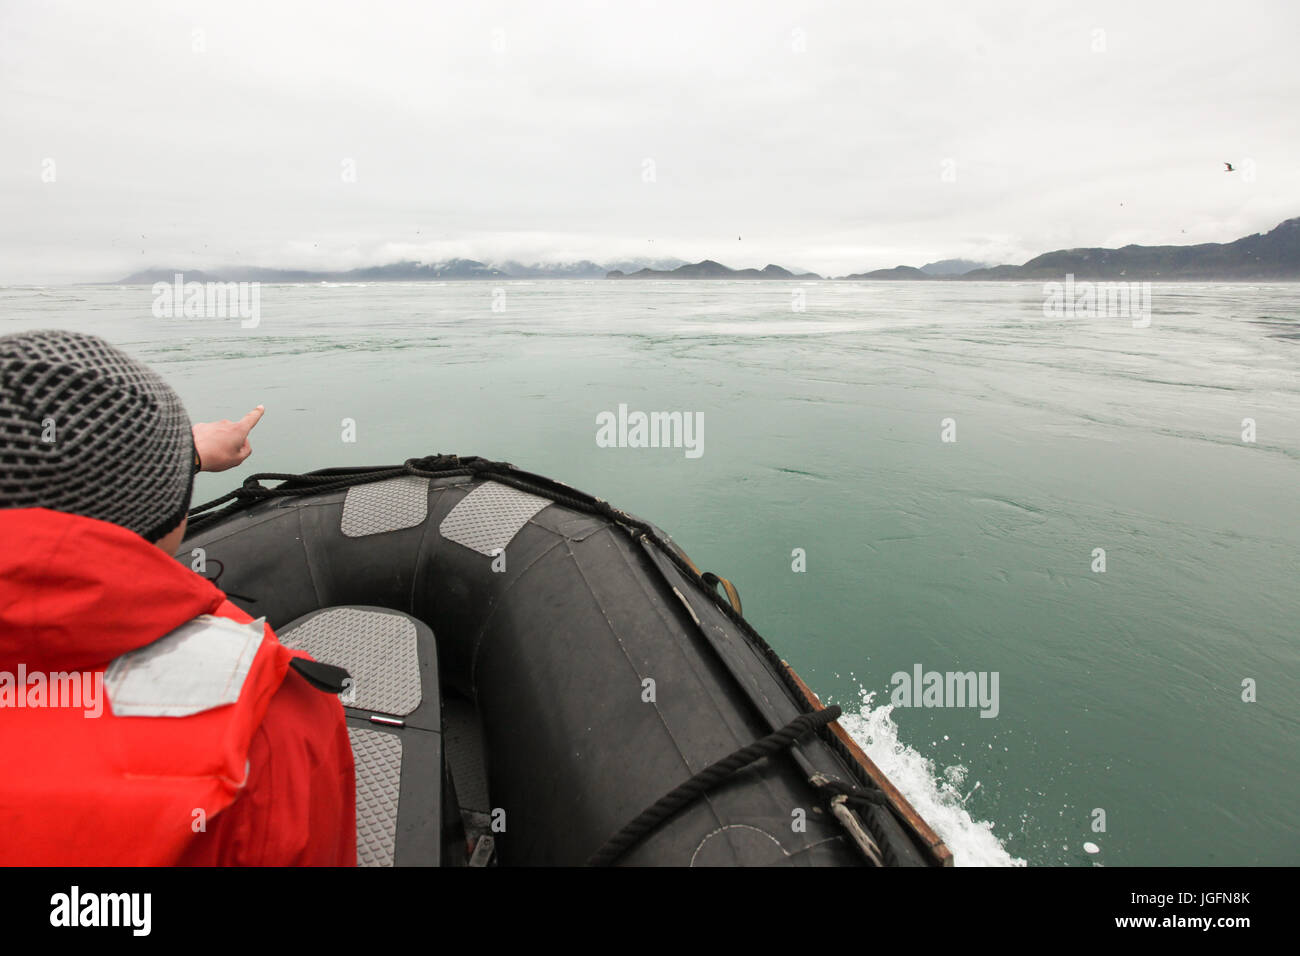 A passenger in a Zodiak boat looks at and points toward the landscape ahead of him. Stock Photo